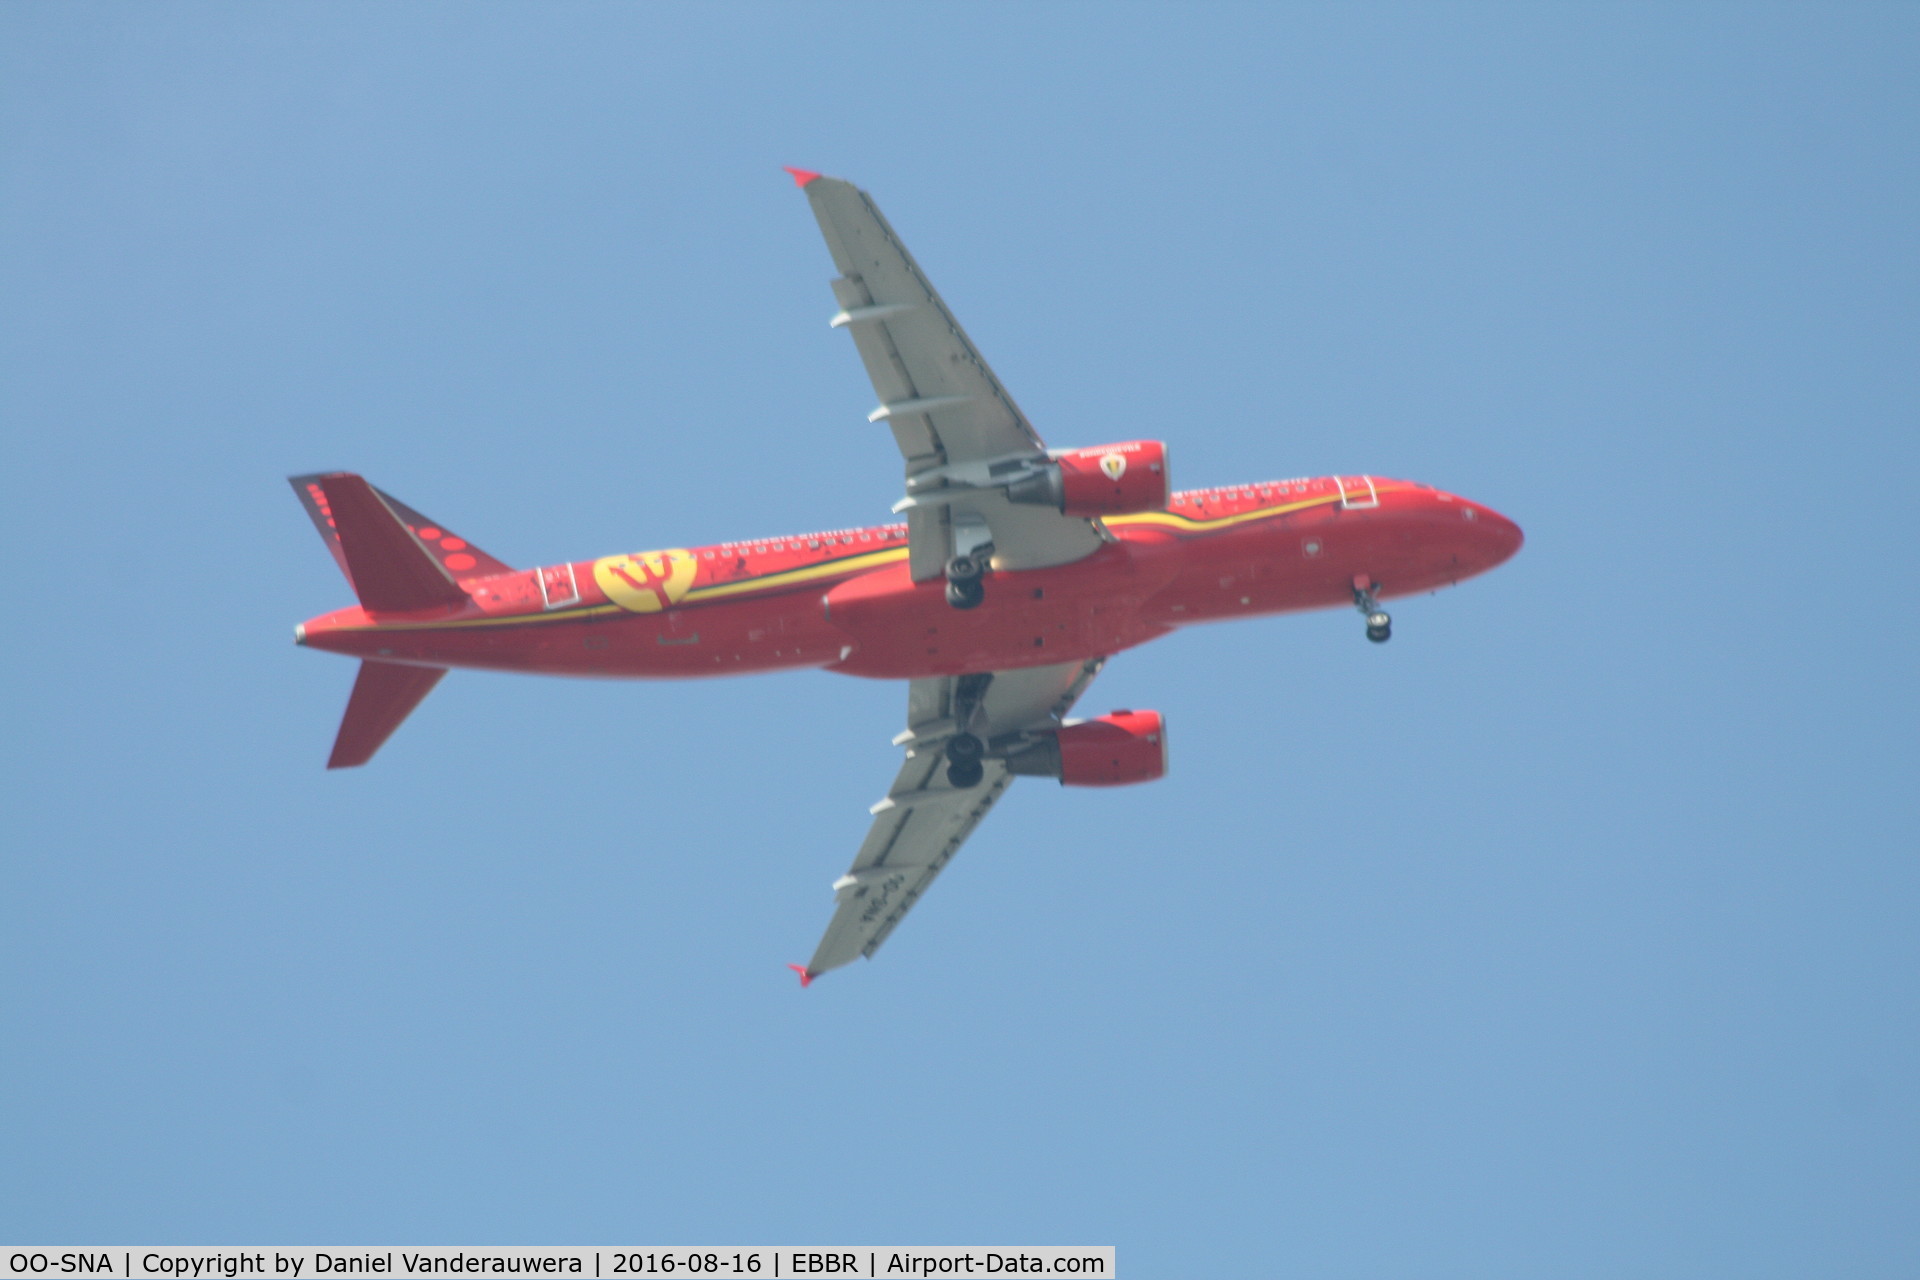 OO-SNA, 2001 Airbus A320-214 C/N 1441, Descending to RWY 07L